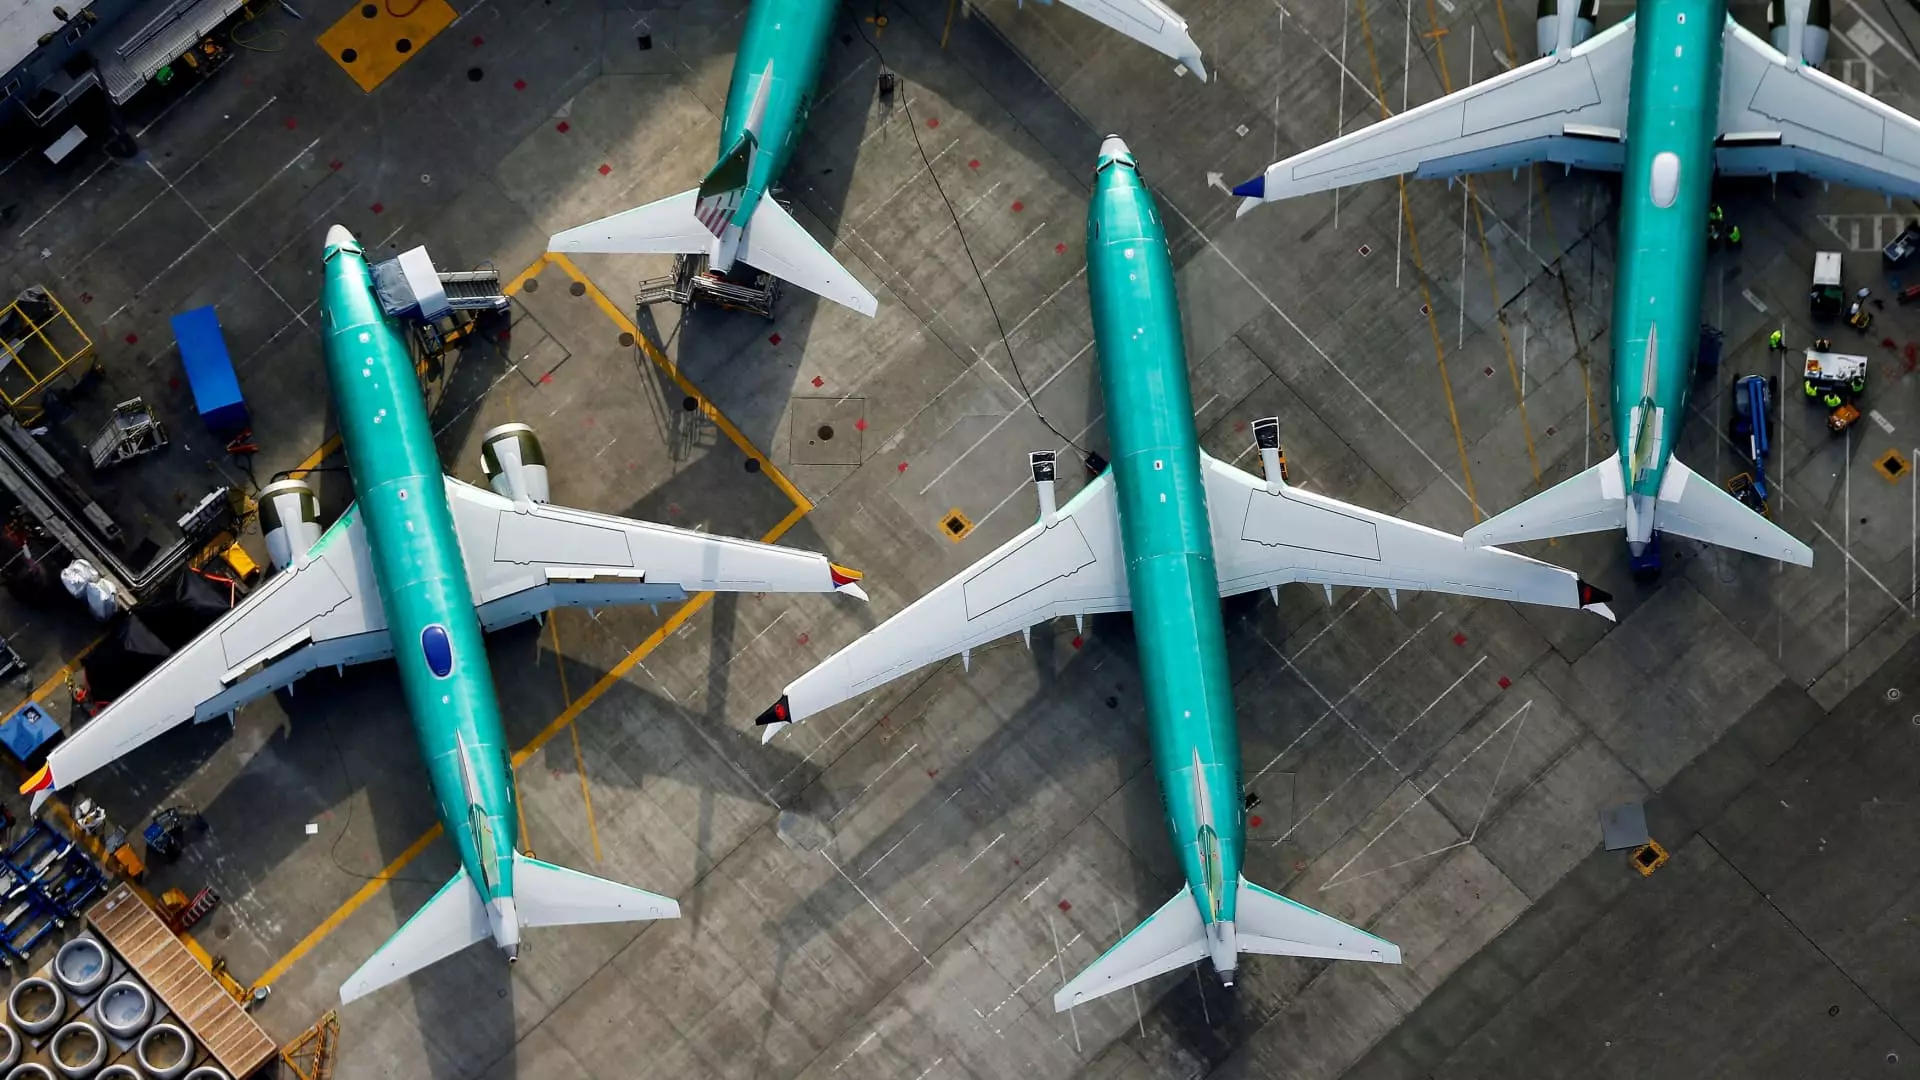 The Downfall of Boeing: A Turbulent Quarter Ahead